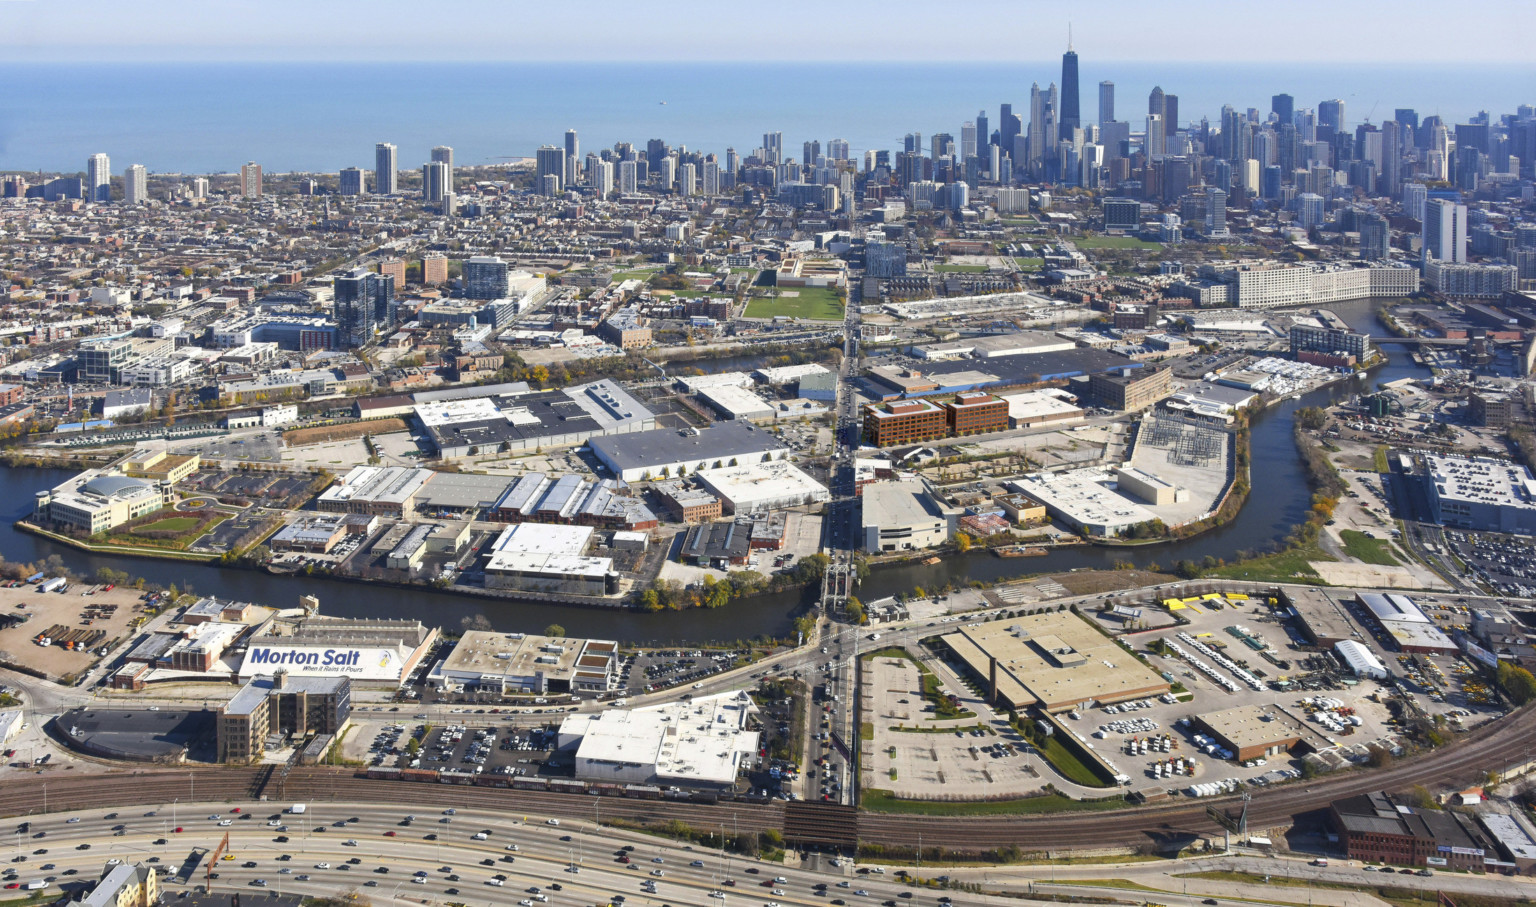 Aerial view of the city of Chicago with cars driving on interstate and buildings in the background.